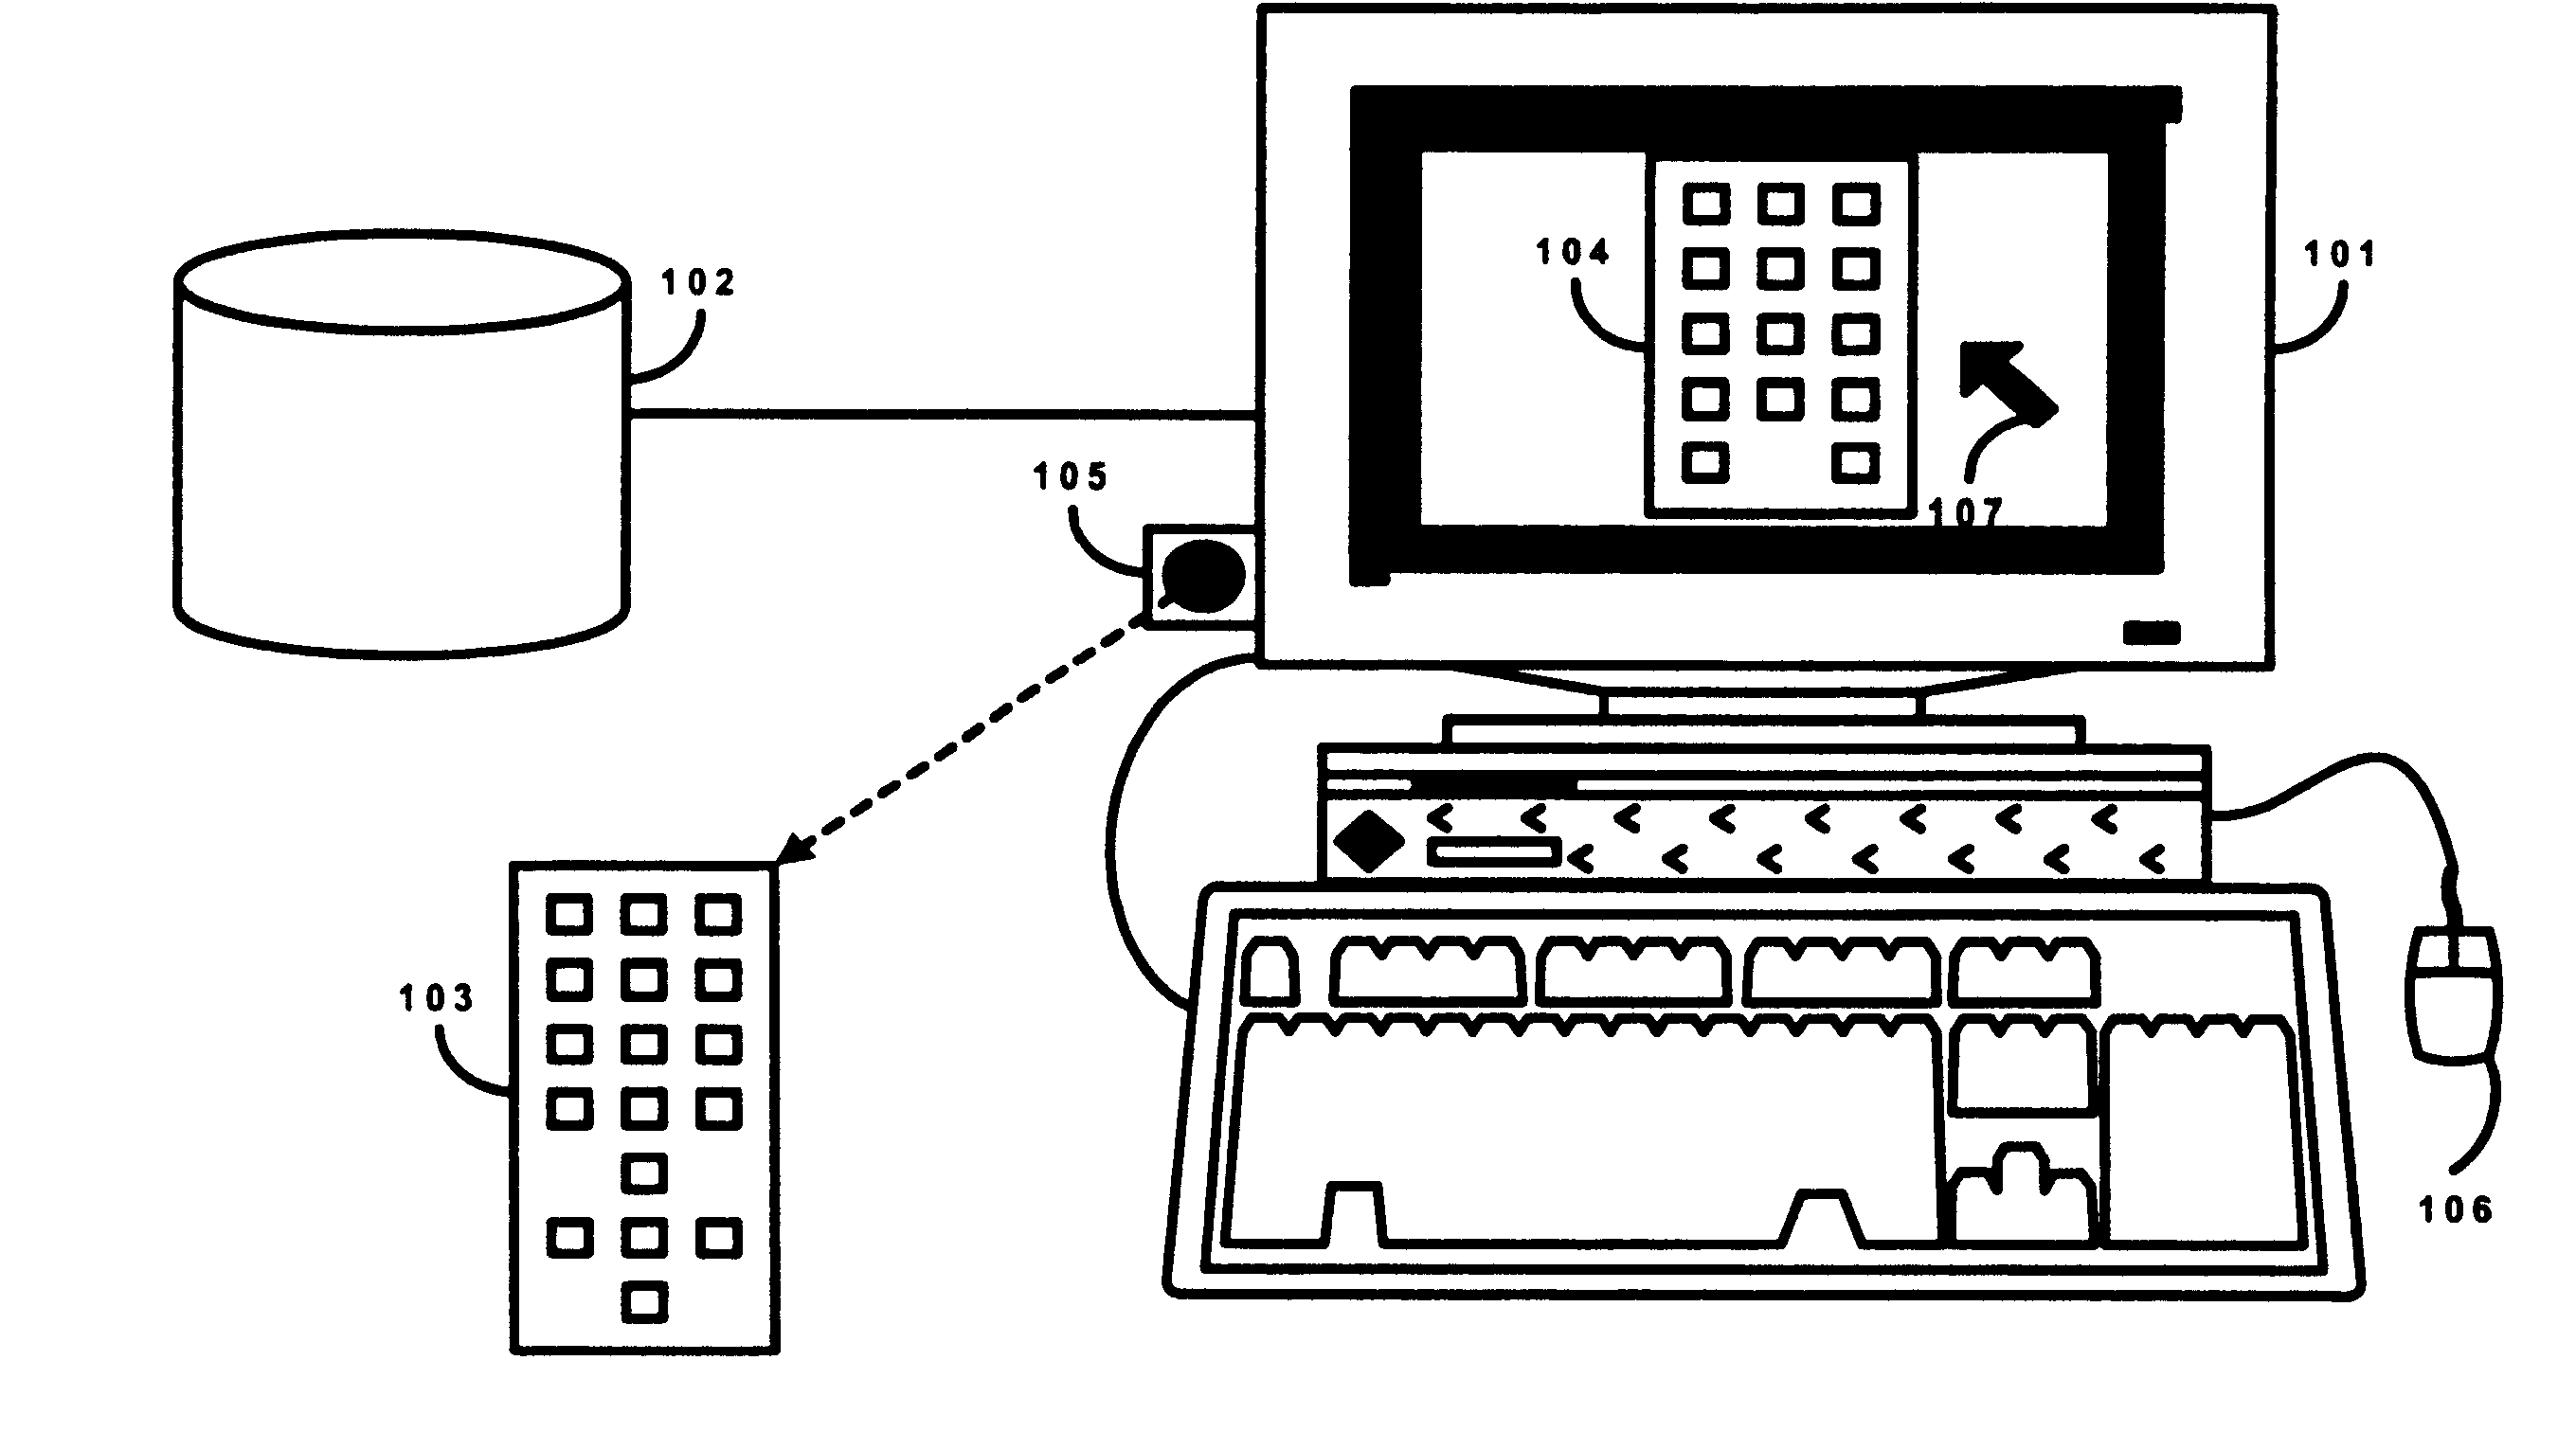 Method and system for upgrading a universal remote control